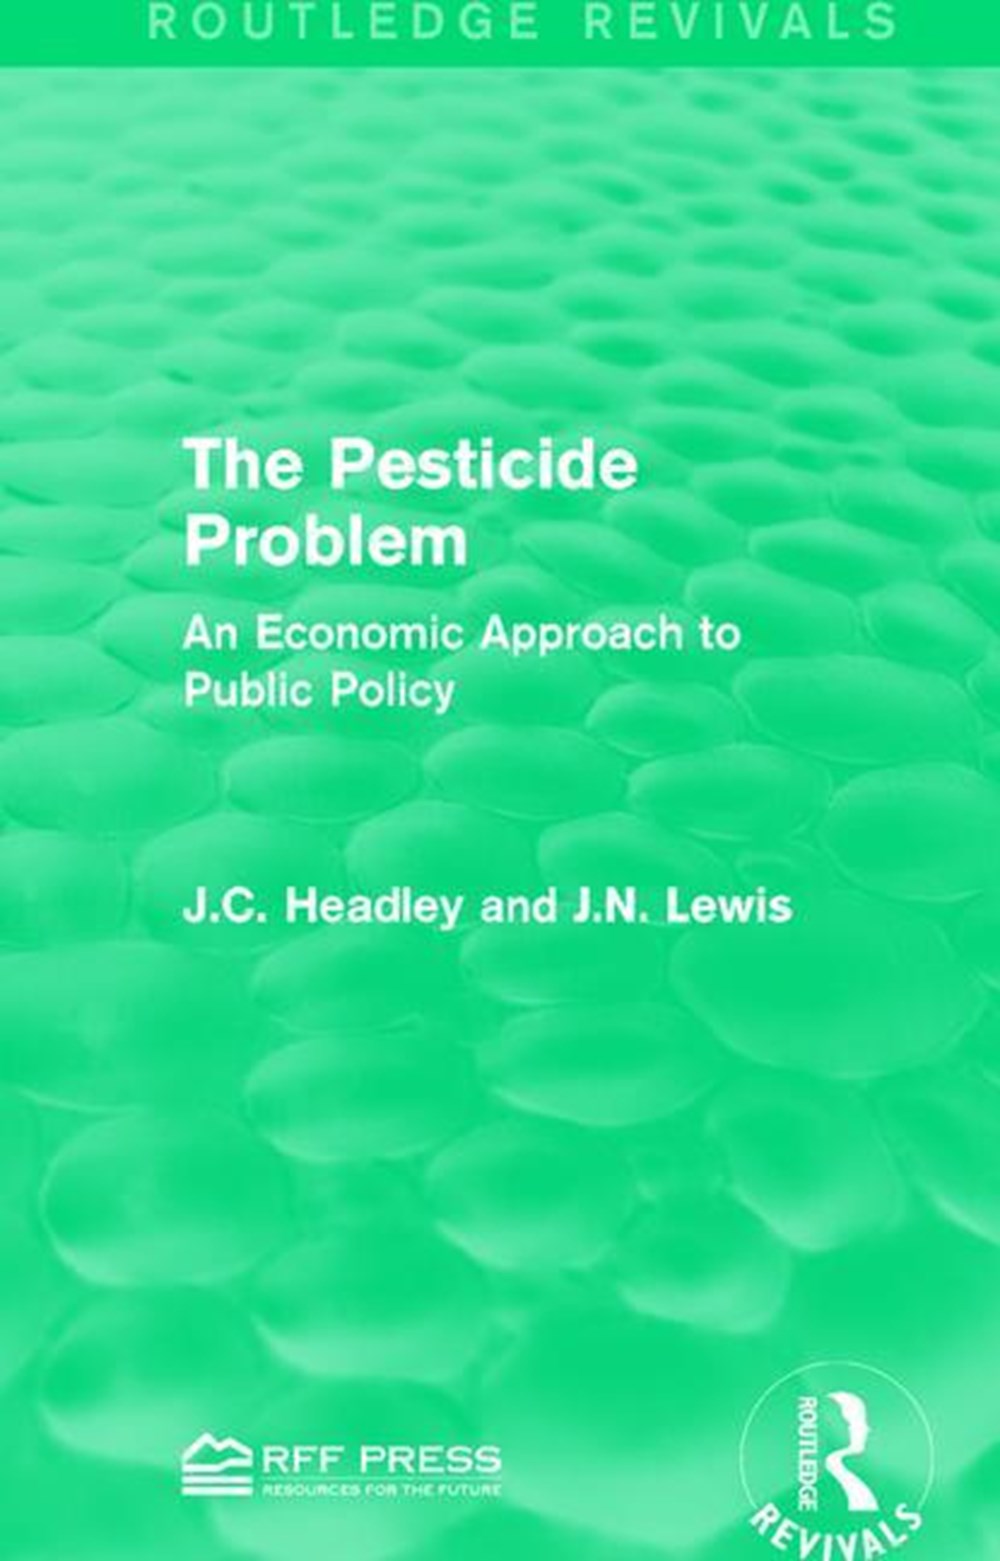 Pesticide Problem: An Economic Approach to Public Policy